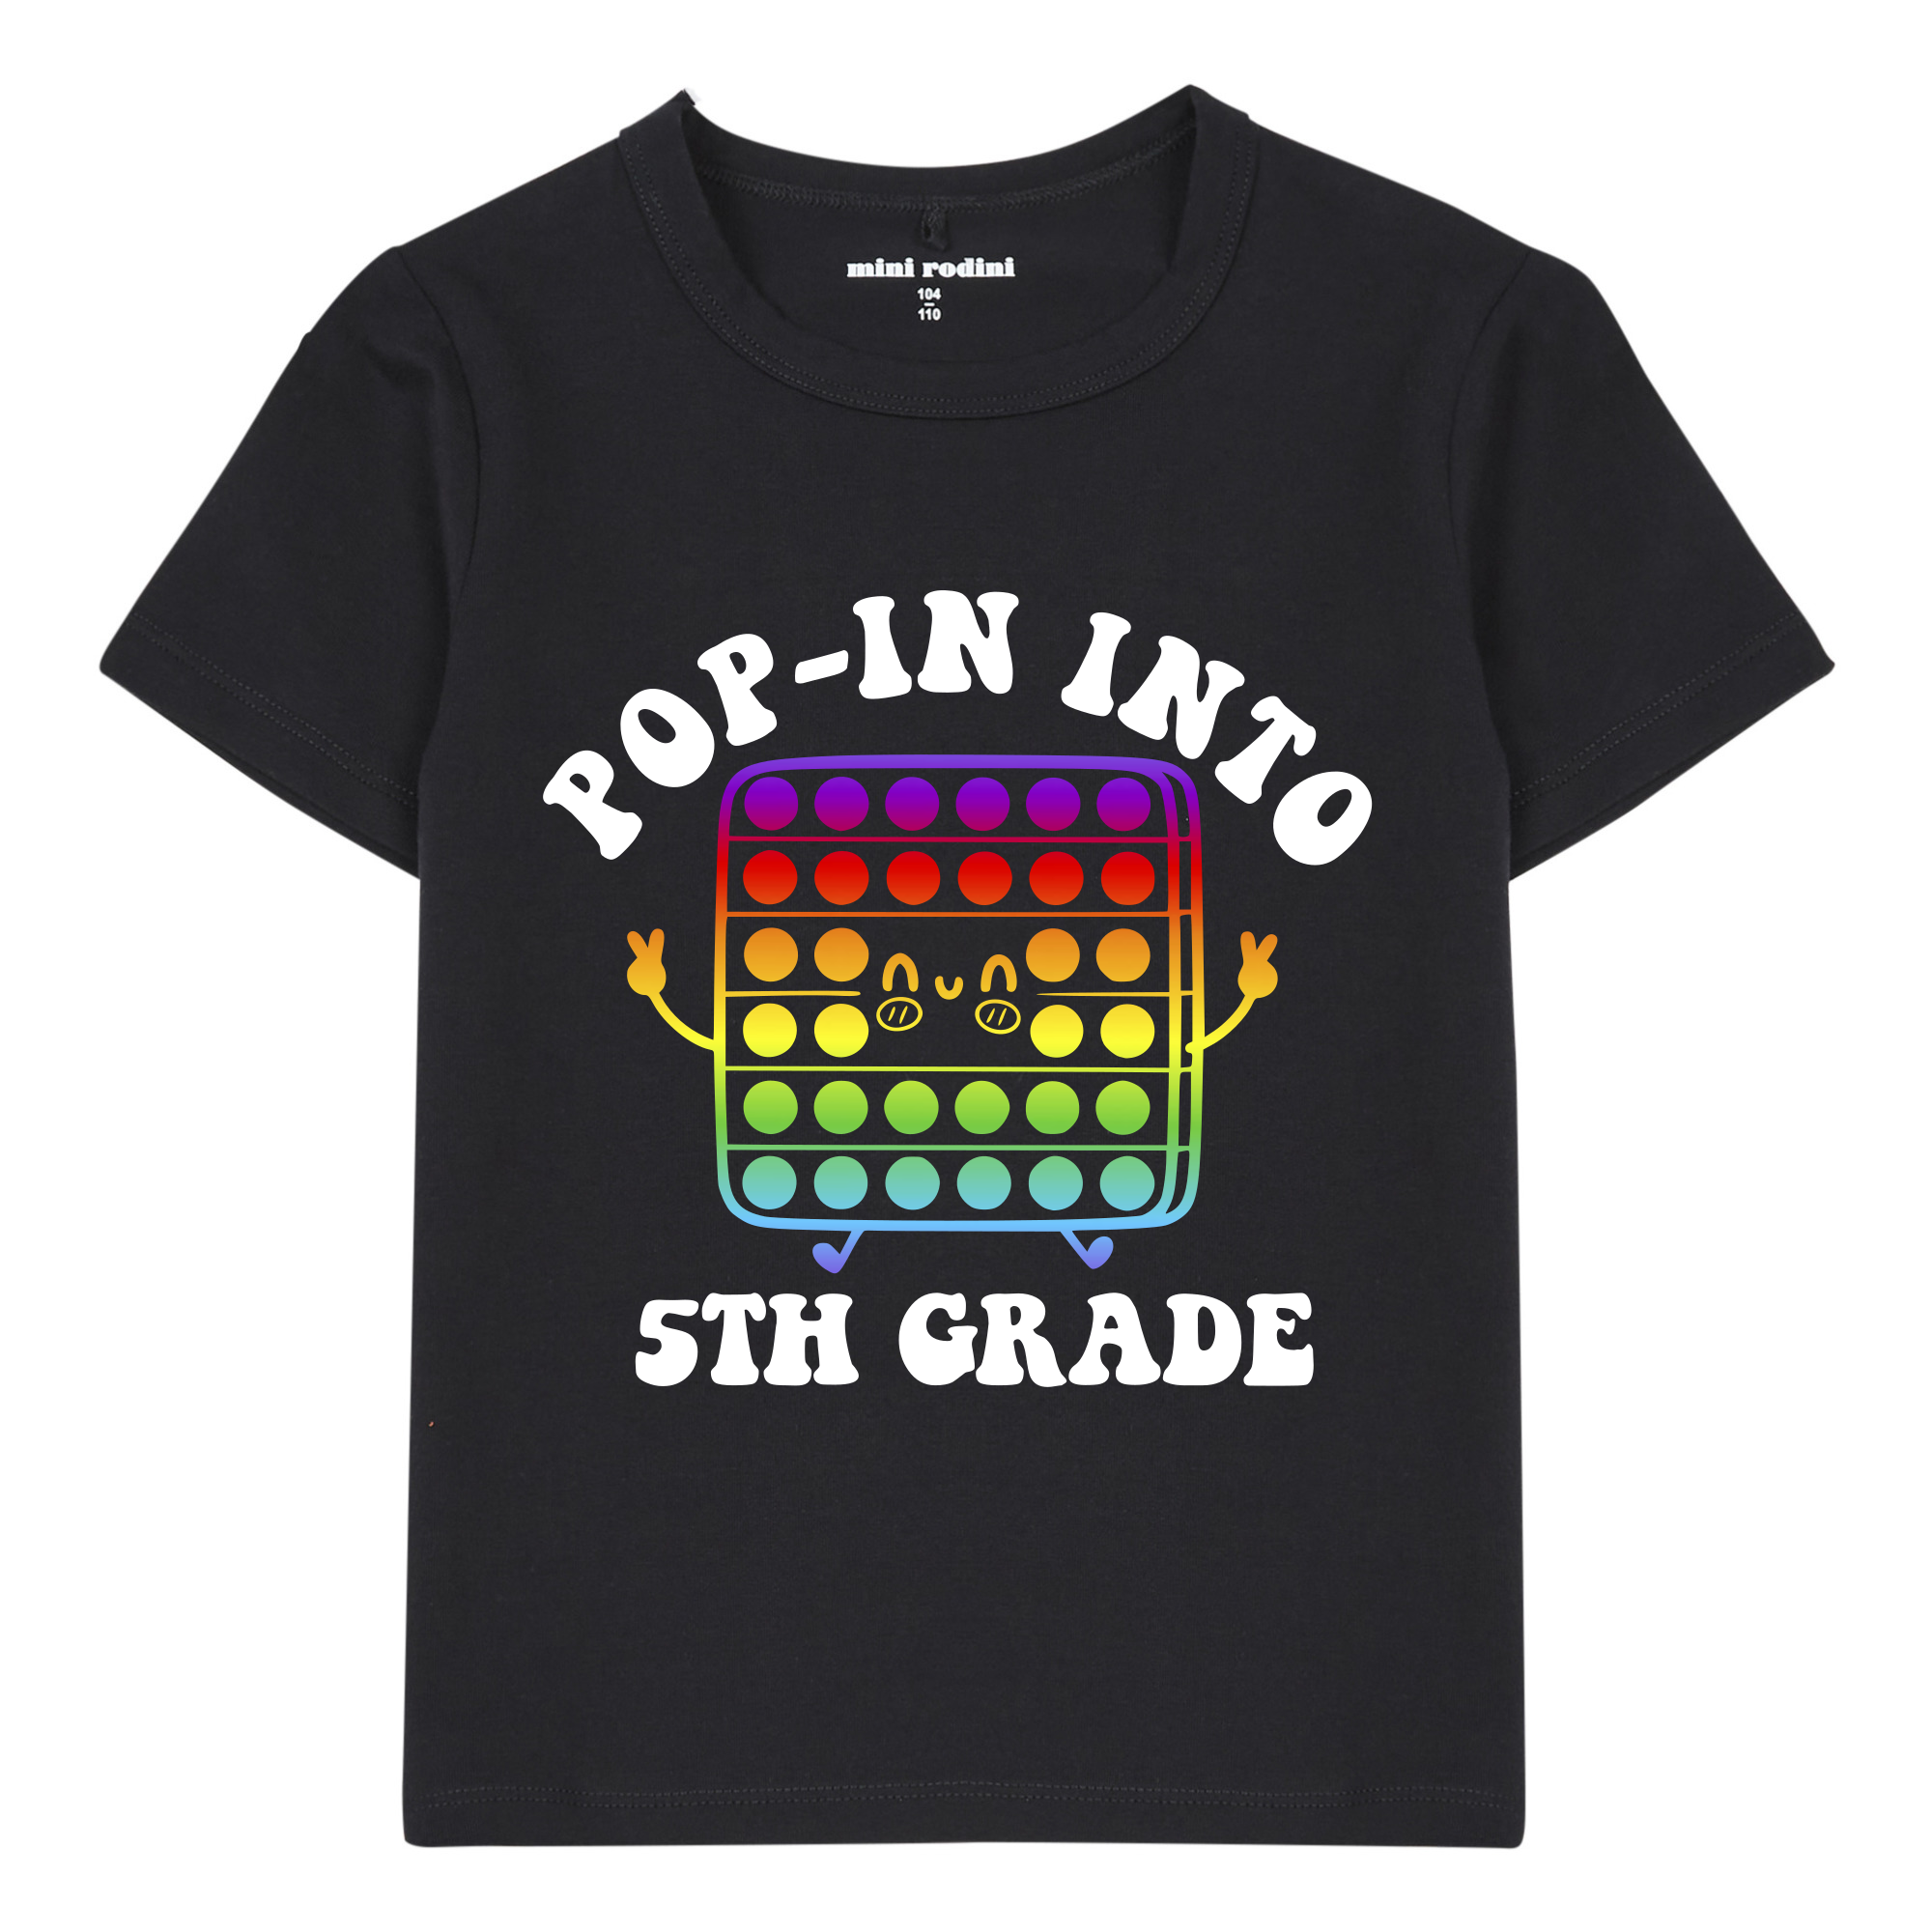 POP-IN INTO 5TH GRADE KIDS T-SHIRT